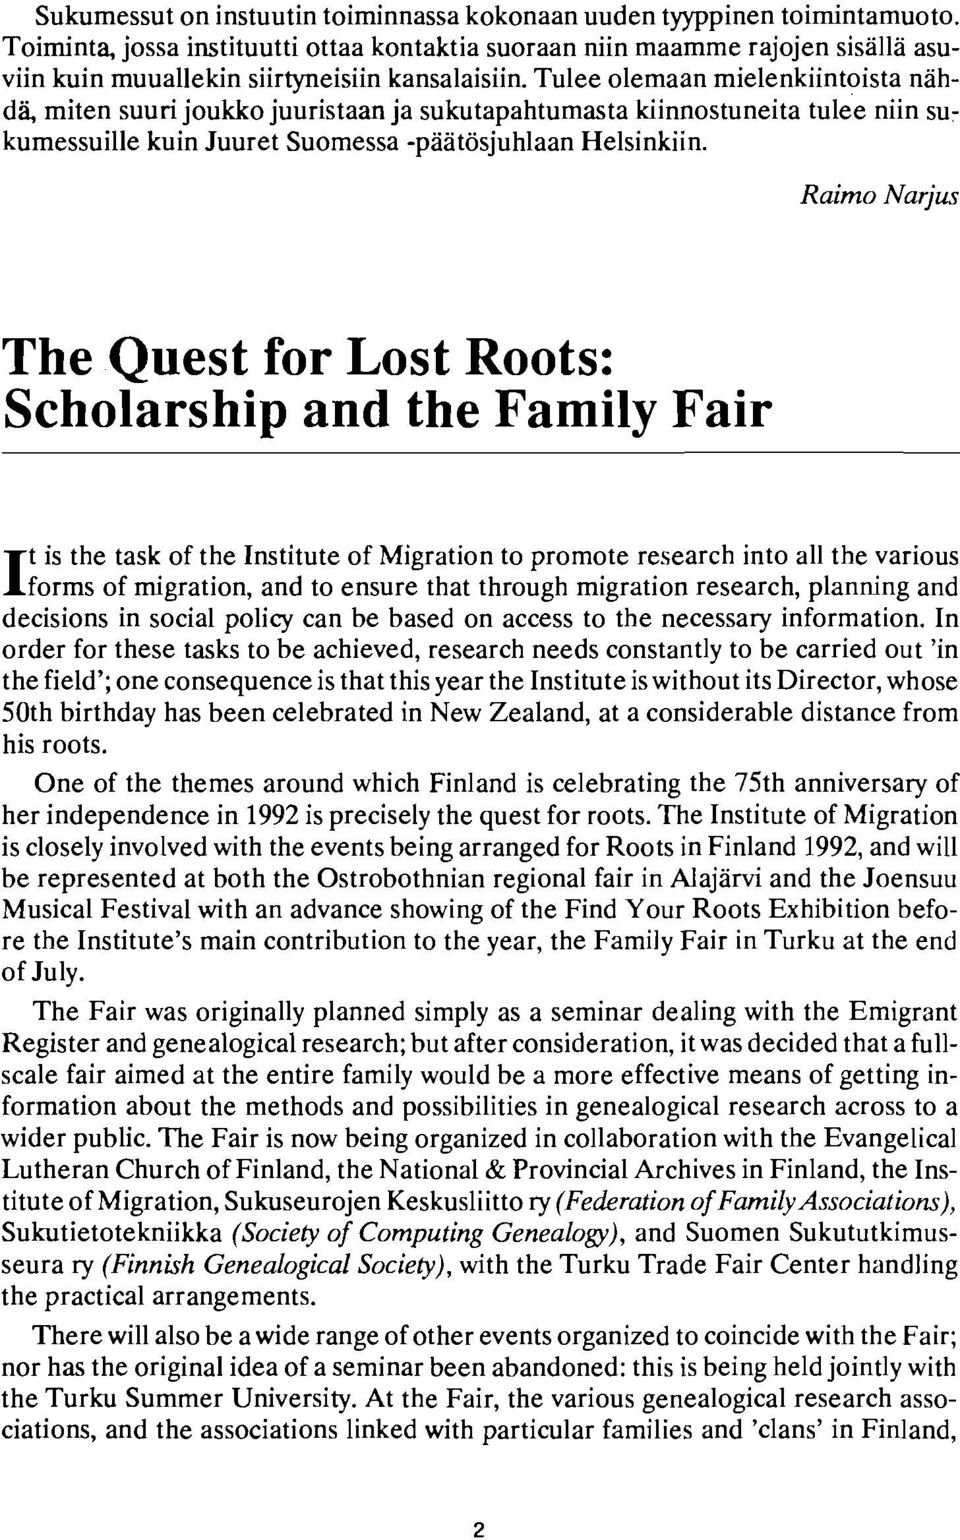 Raim The Quest for Lost Roots: Scholarship and the Family Fair 1t is the task of the Institute of Migration to promote research into all the lforms of migration, and to ensure that through migration